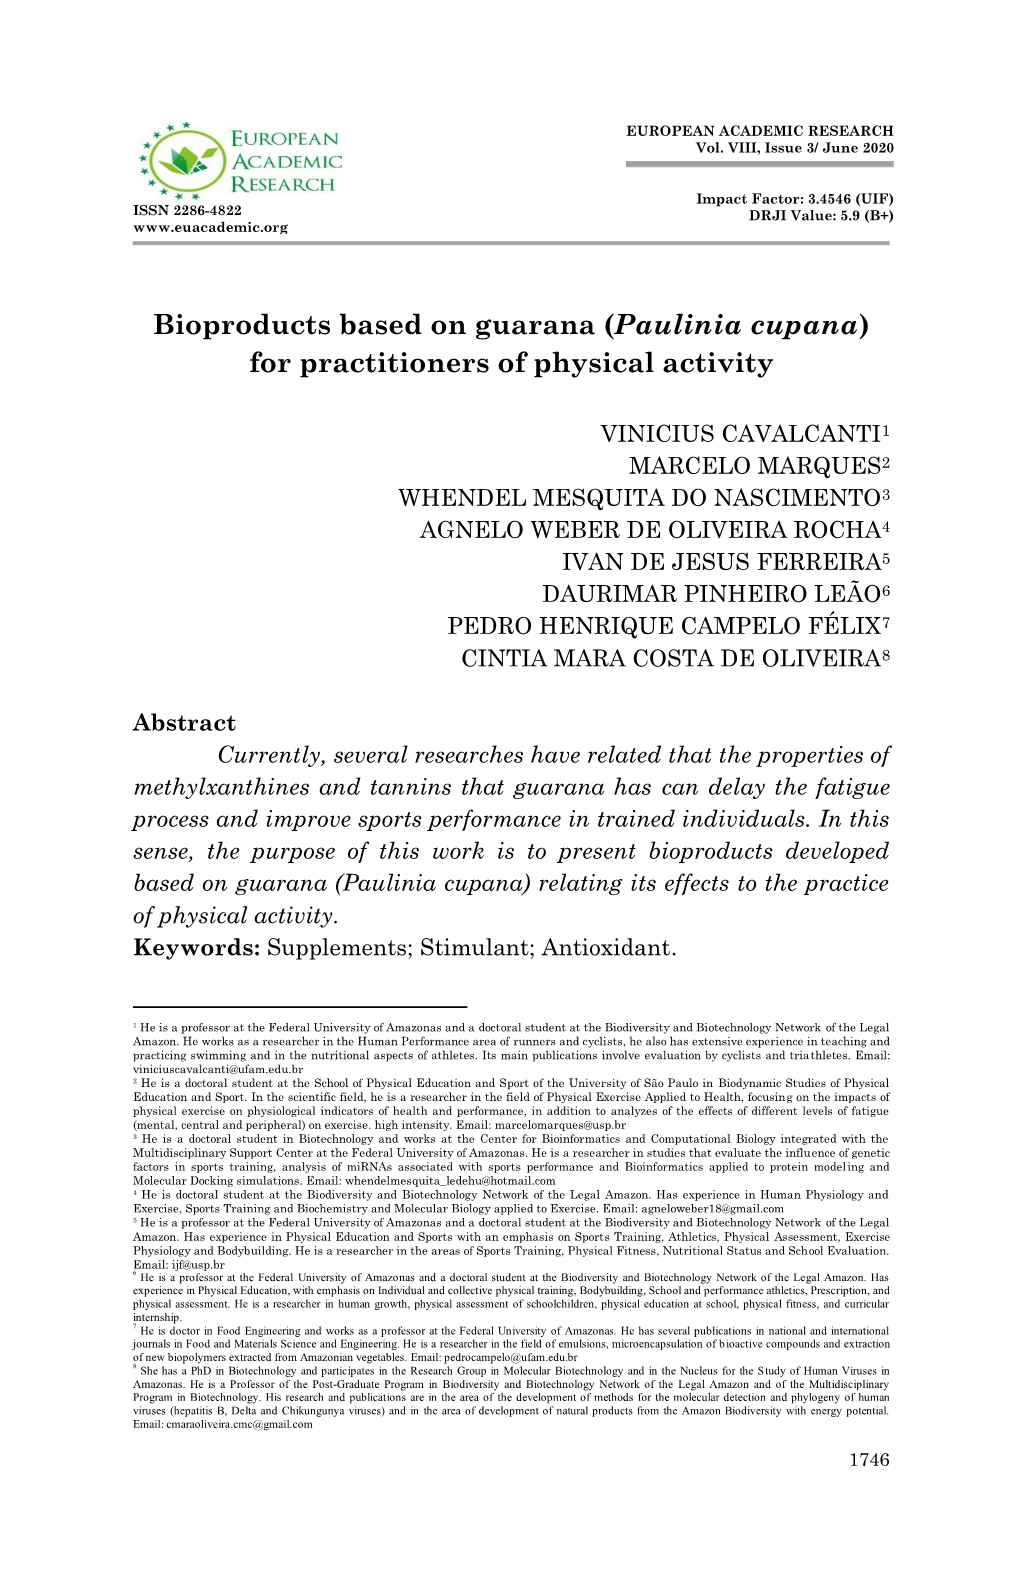 Bioproducts Based on Guarana (Paulinia Cupana) for Practitioners of Physical Activity